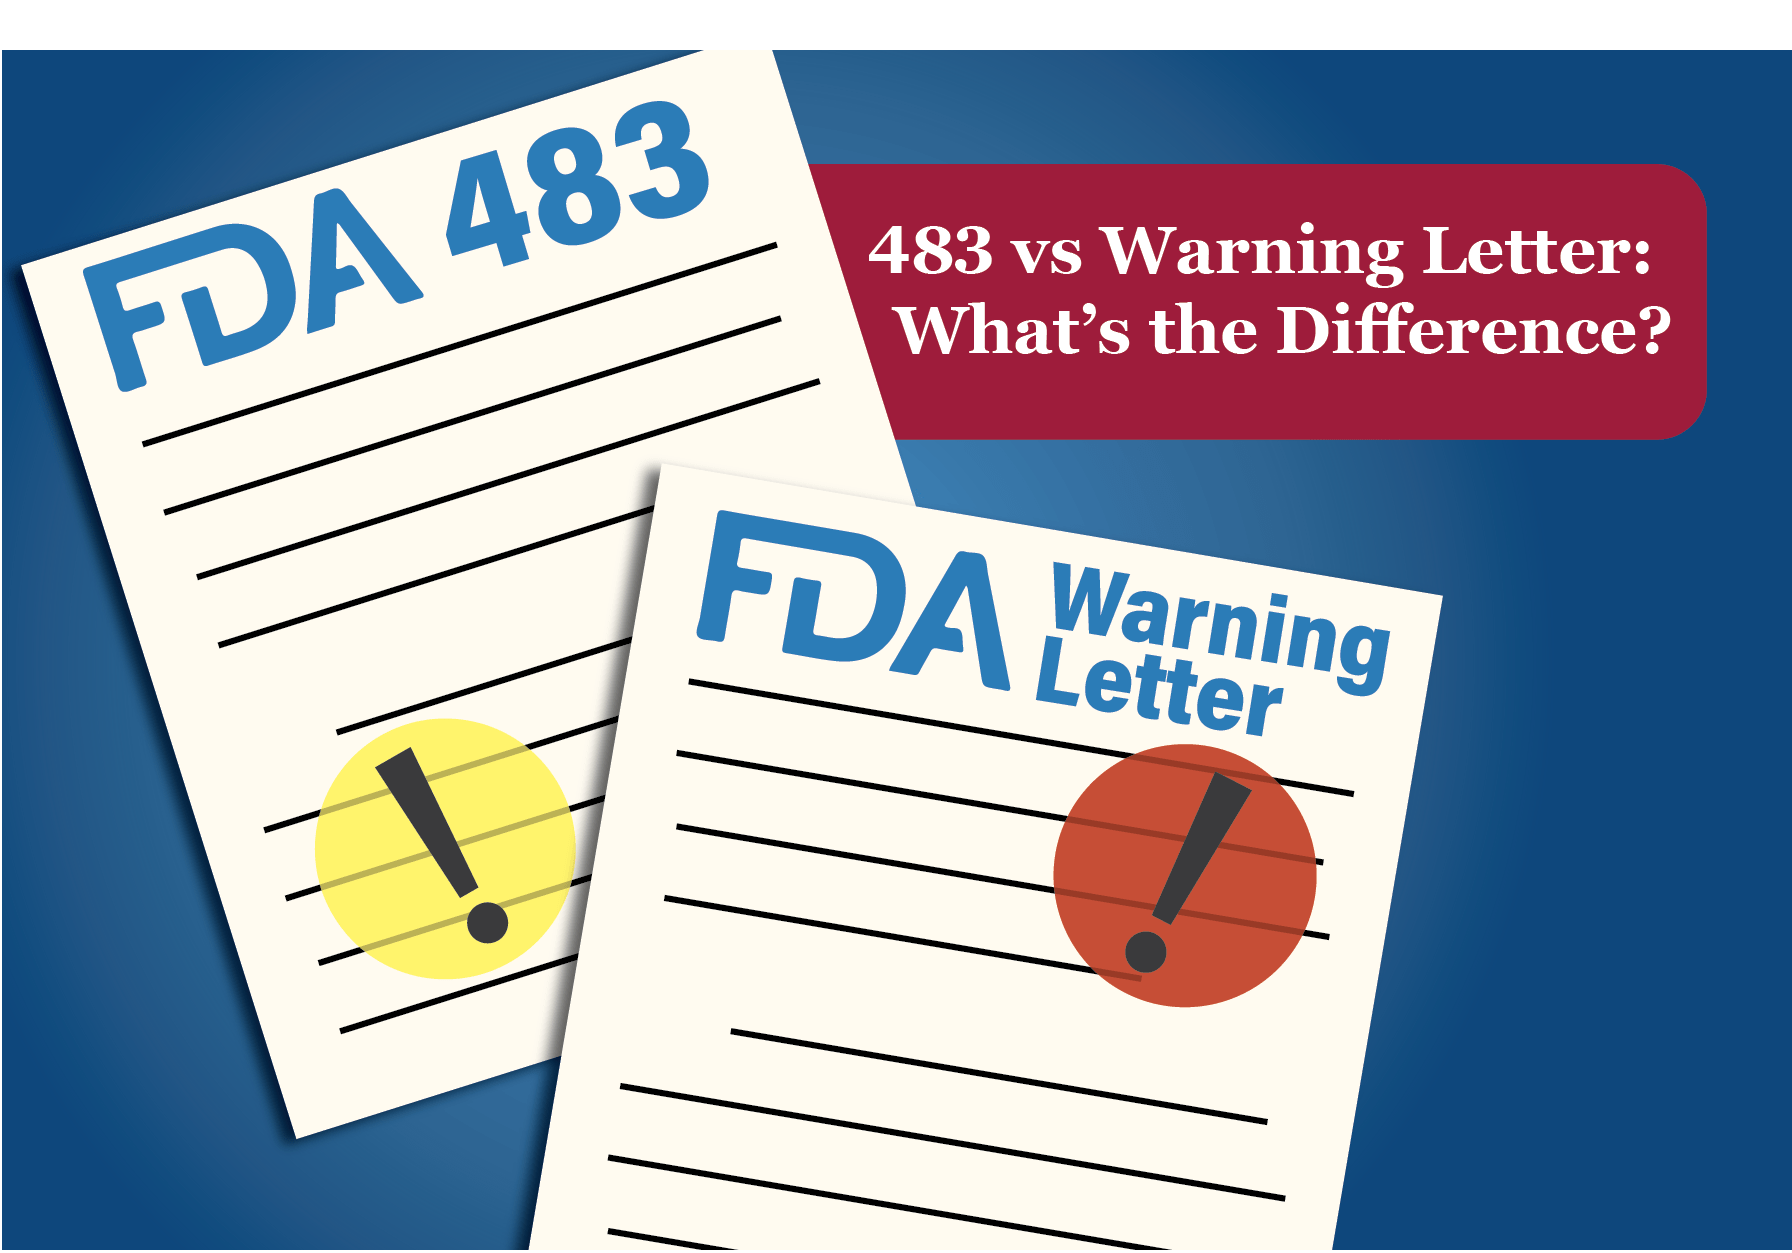 Differences between FDA Form 483 and Warning Letter